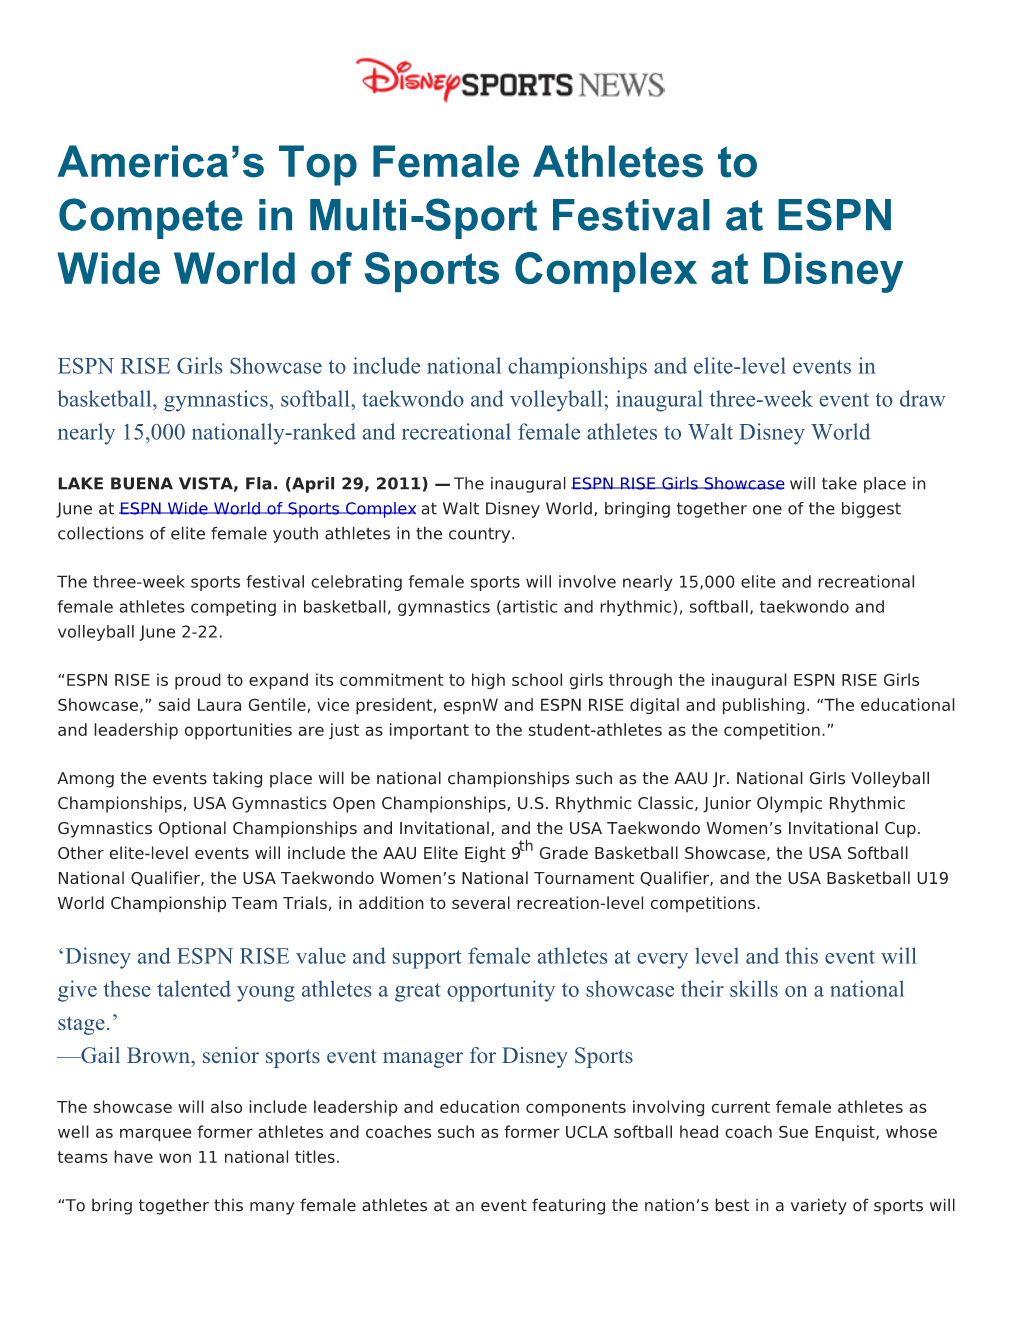 America's Top Female Athletes to Compete in Multi-Sport Festival At